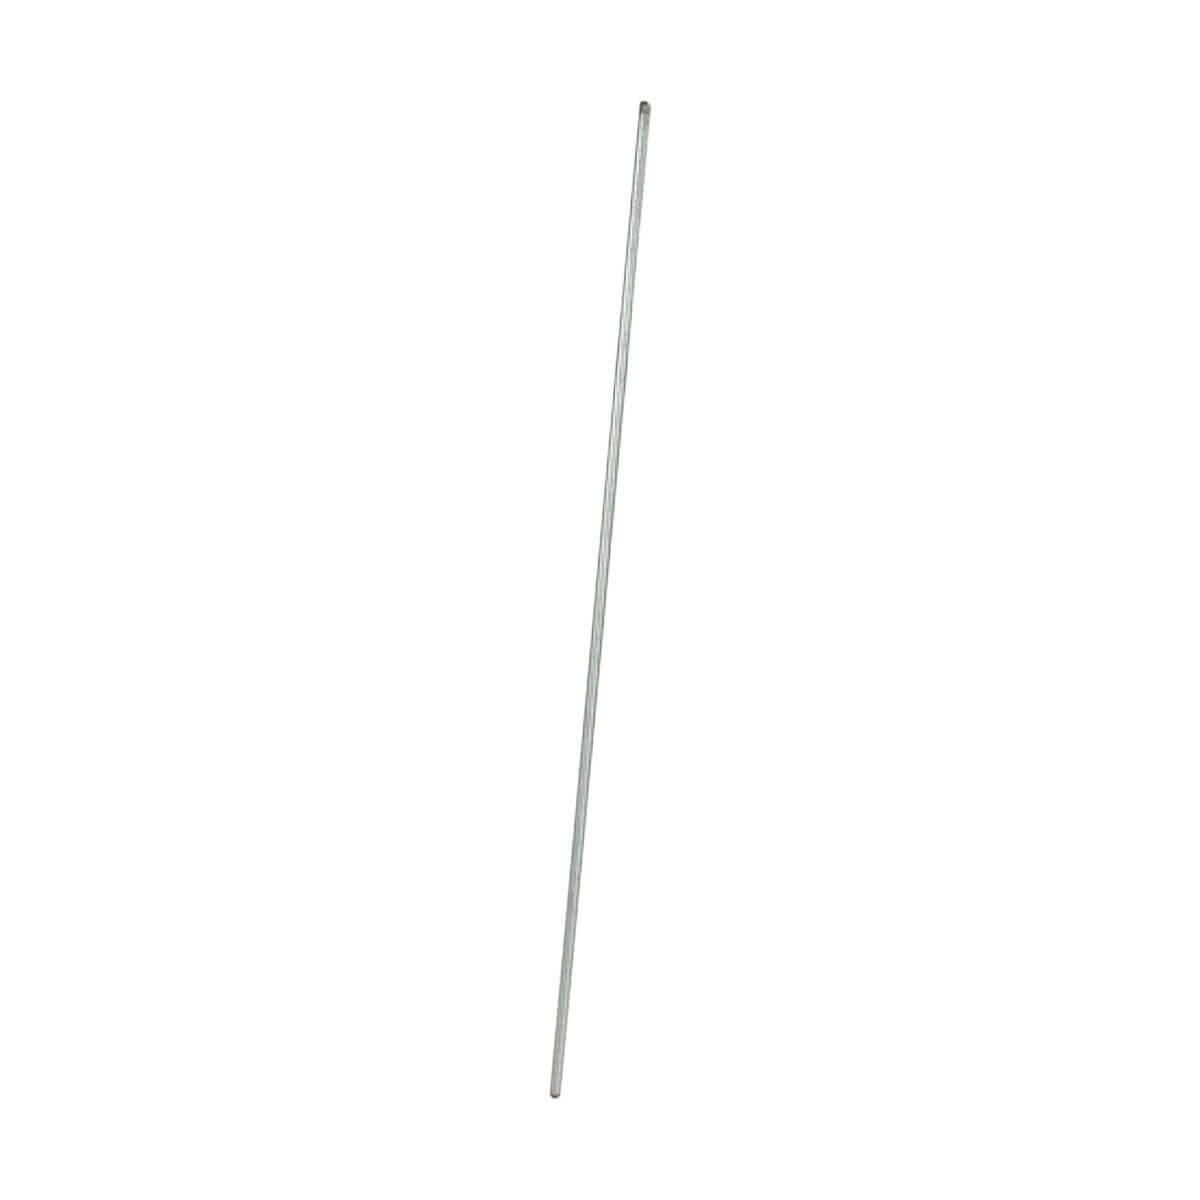 Gallagher Ground Stake - 6-ft